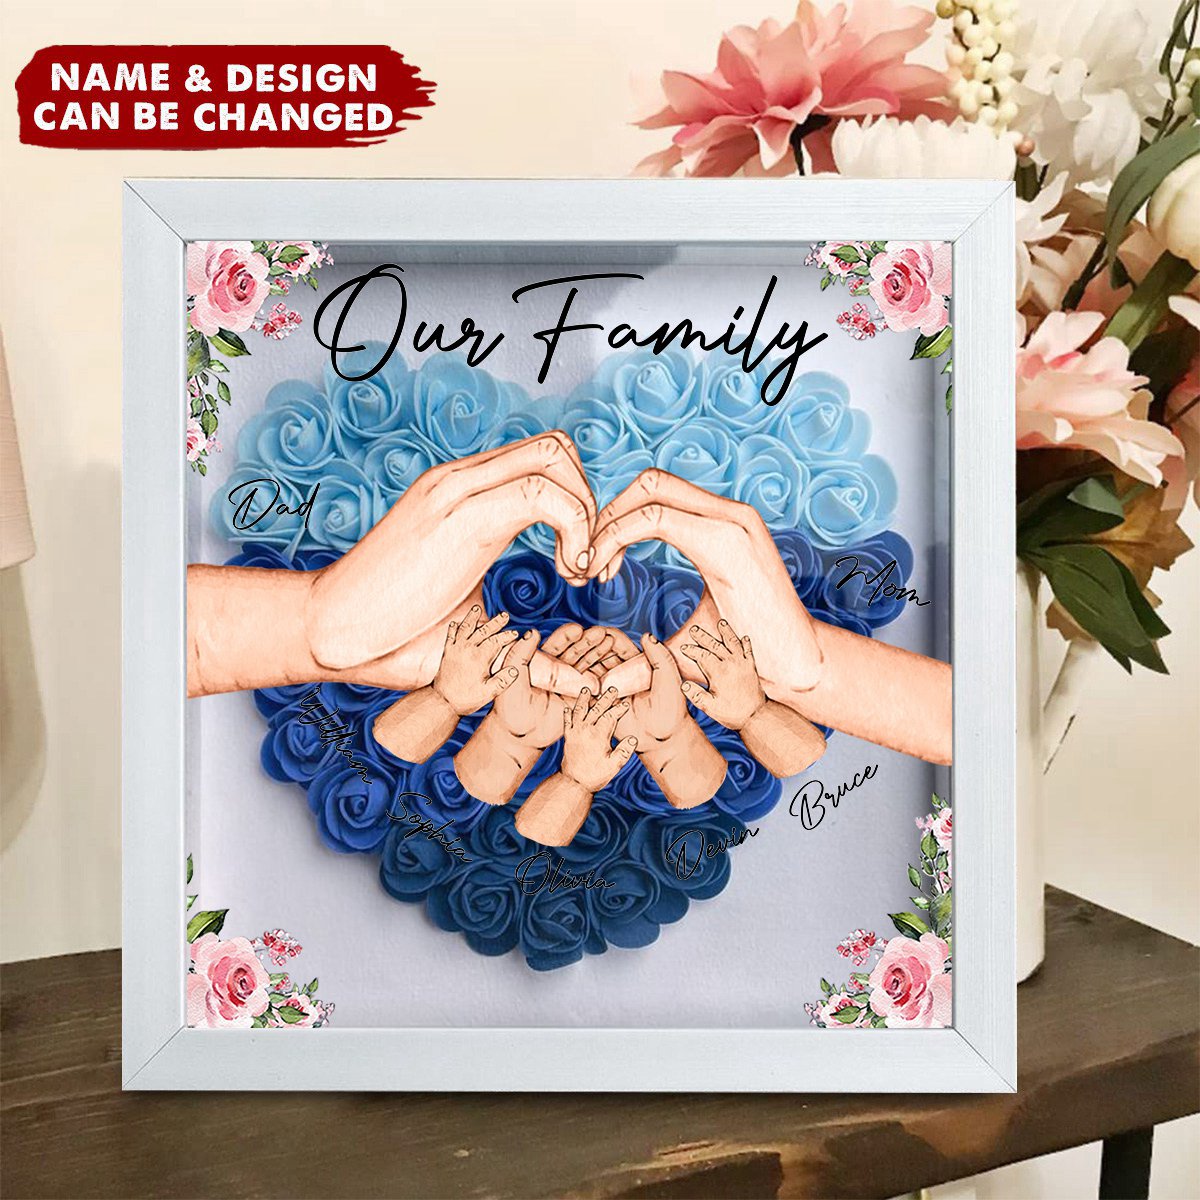 Our Family Hands - Personalized Flower Shadow Box